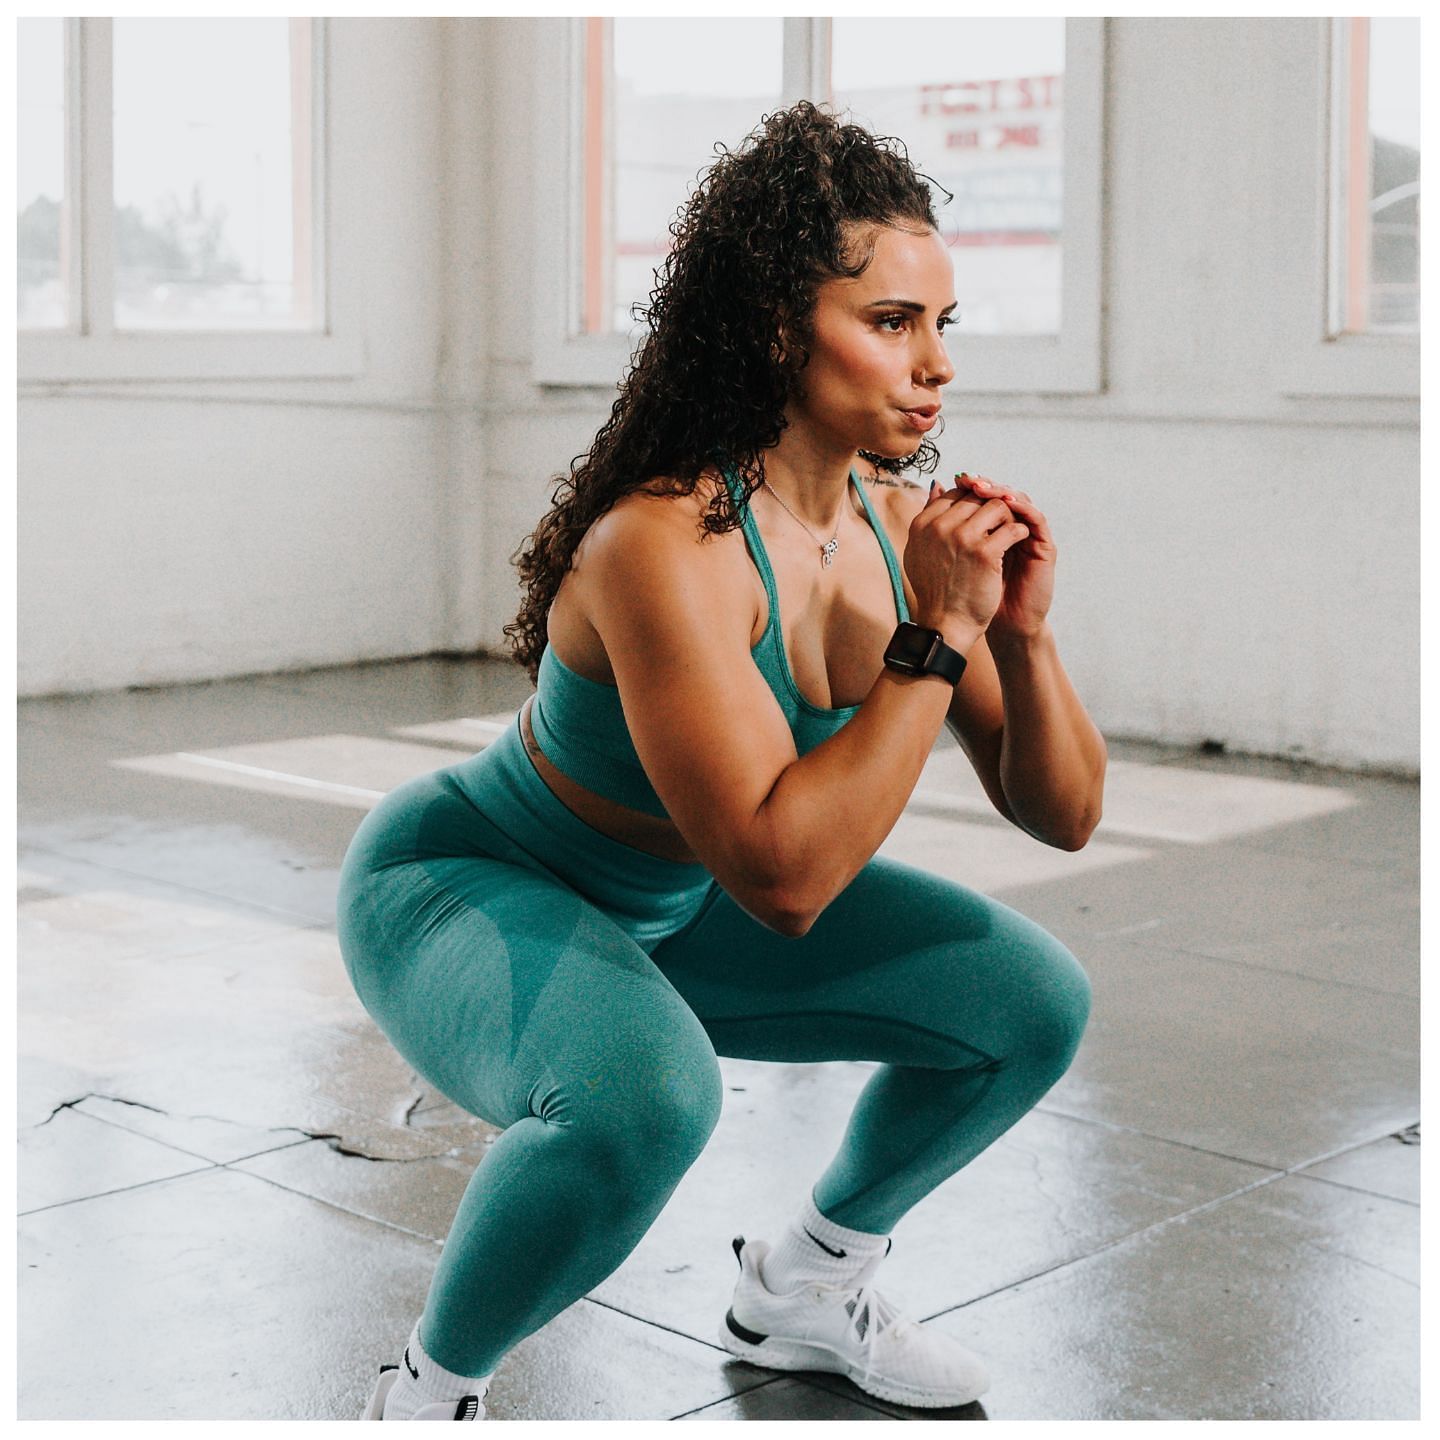 Squats and other form of bodyweight exercises can help tone your thighs and butt. (Image via Unsplash / SUNDAY II SUNDAY)